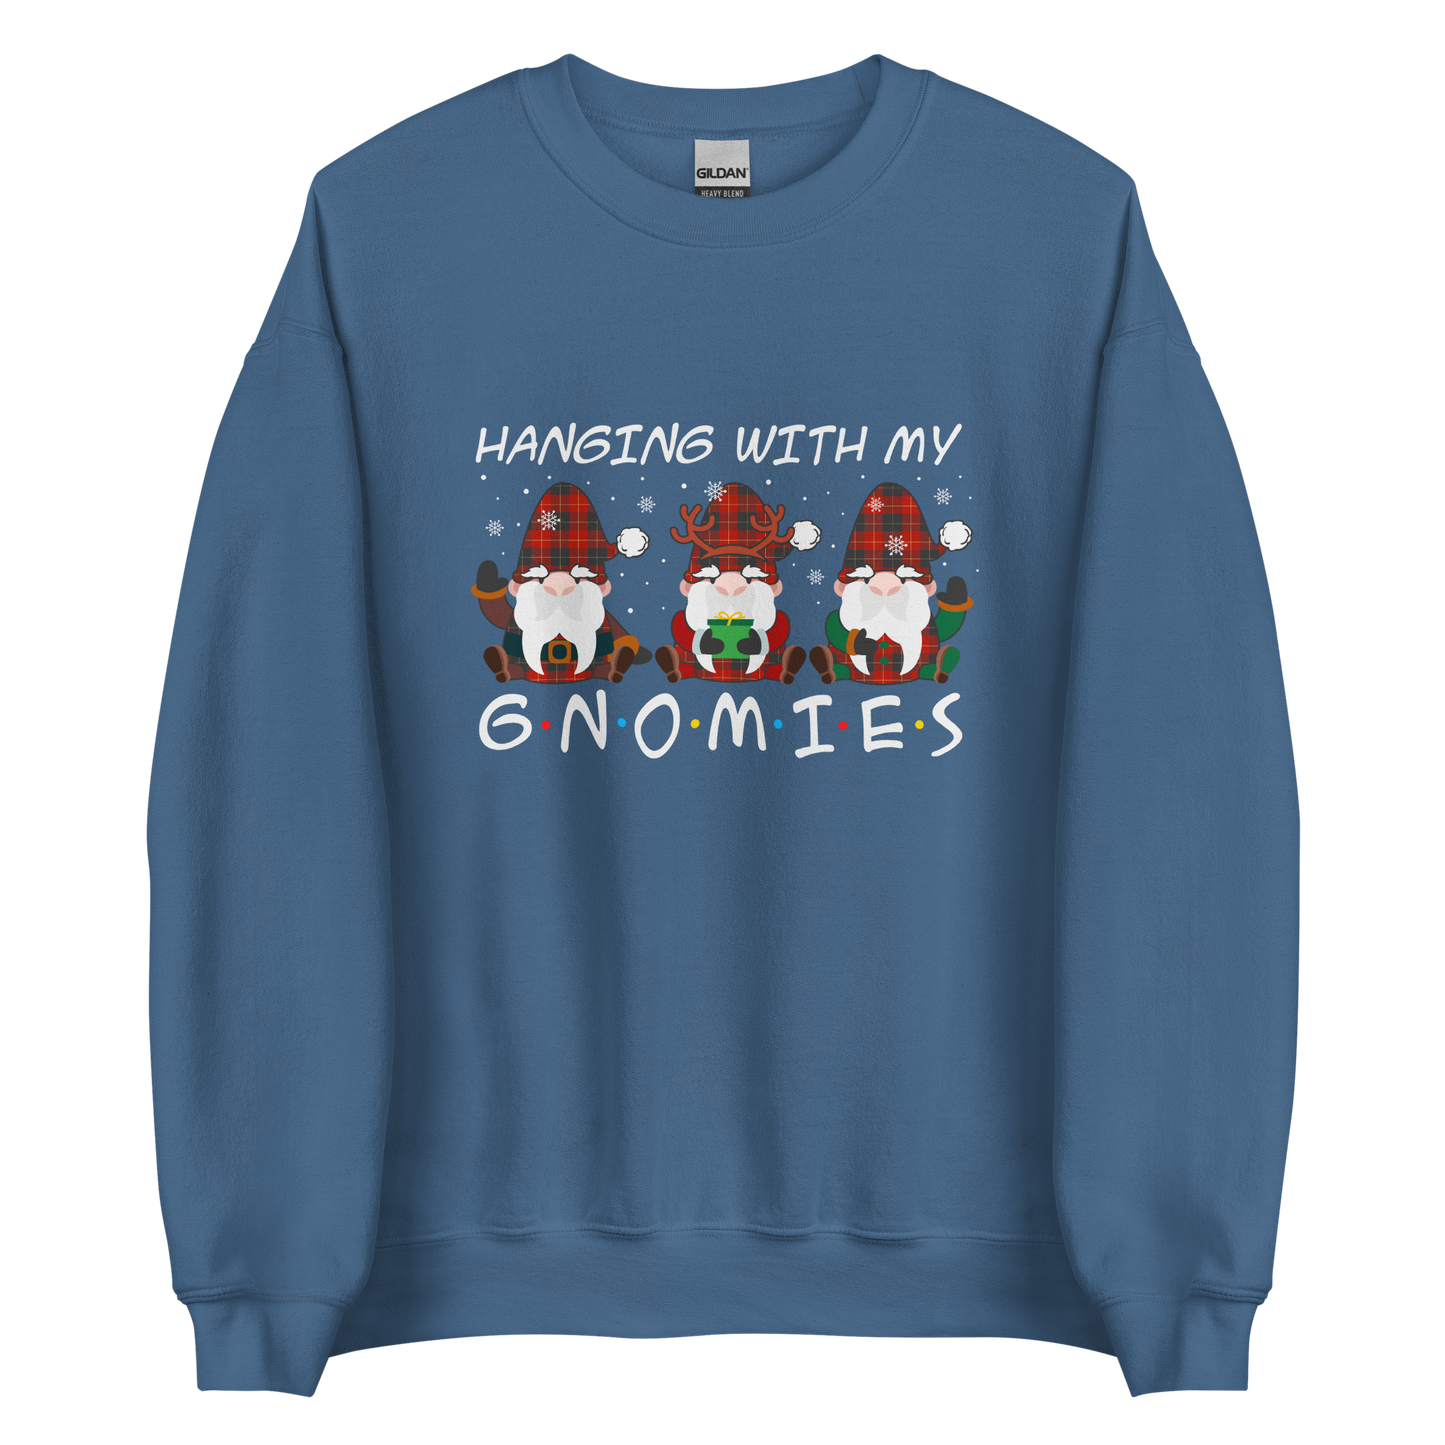 Indigo Blue Christmas Gnome Sweatshirt featuring a delight Hanging With My Gnomies graphic on the chest - Funny Christmas Graphic Gnome Sweatshirts - Boozy Fox